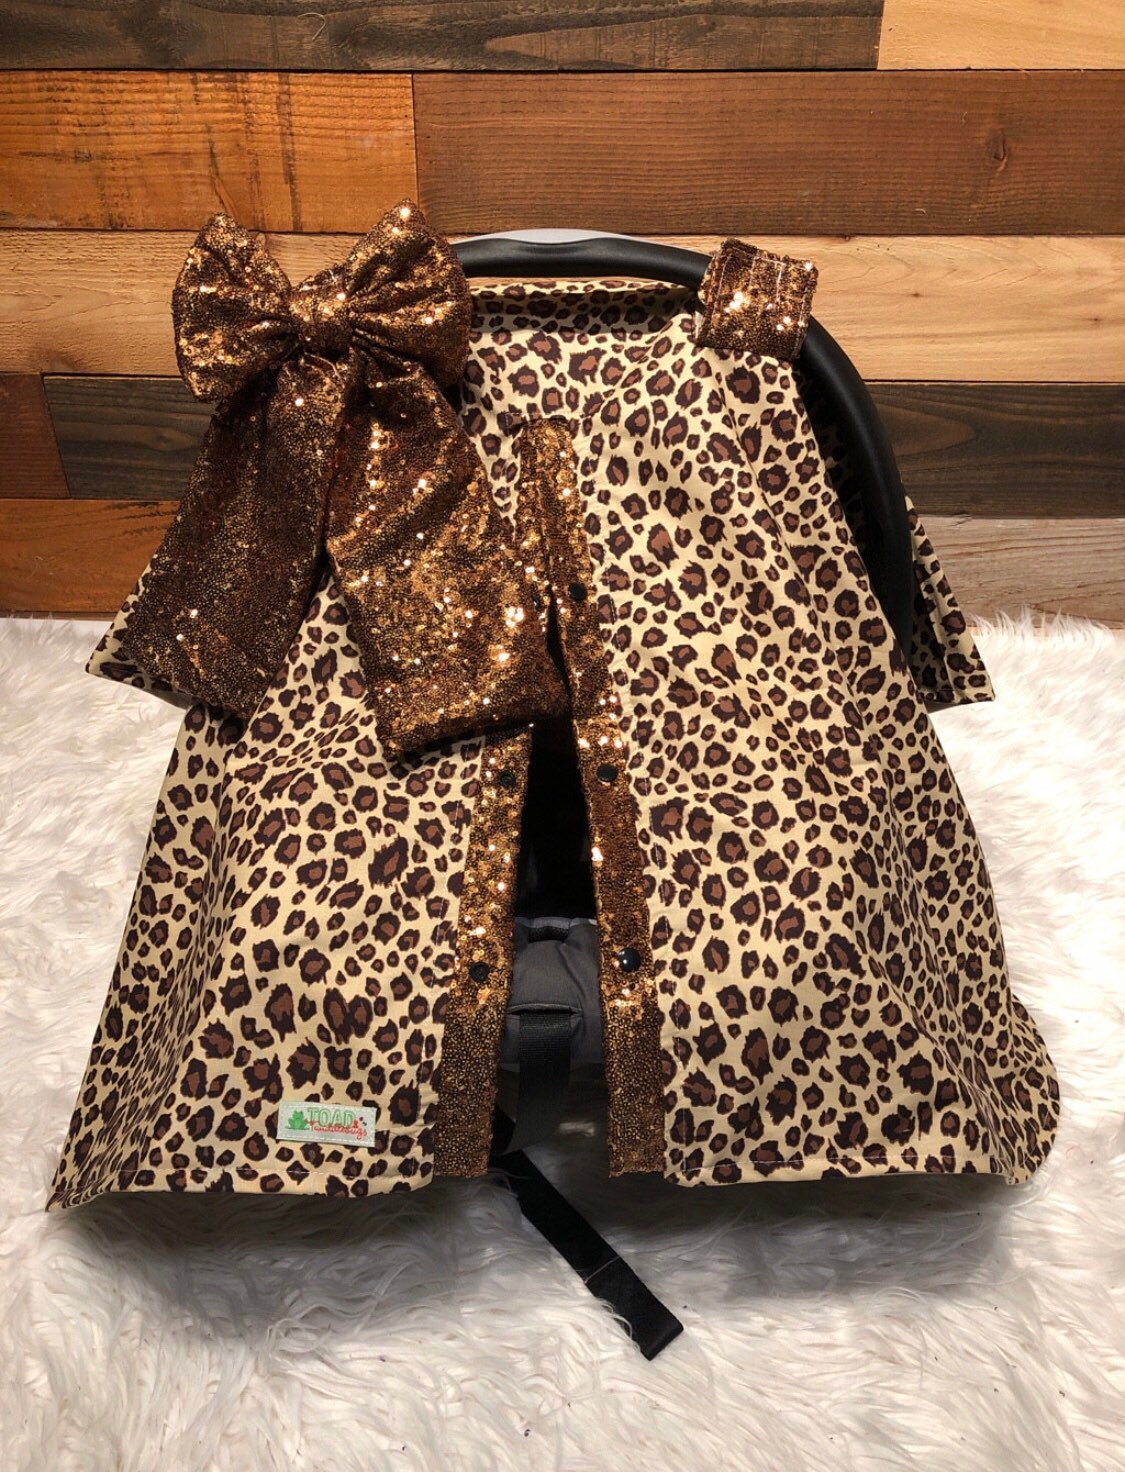 Latest LV seat cover, at - Chibyks Auto car accessories